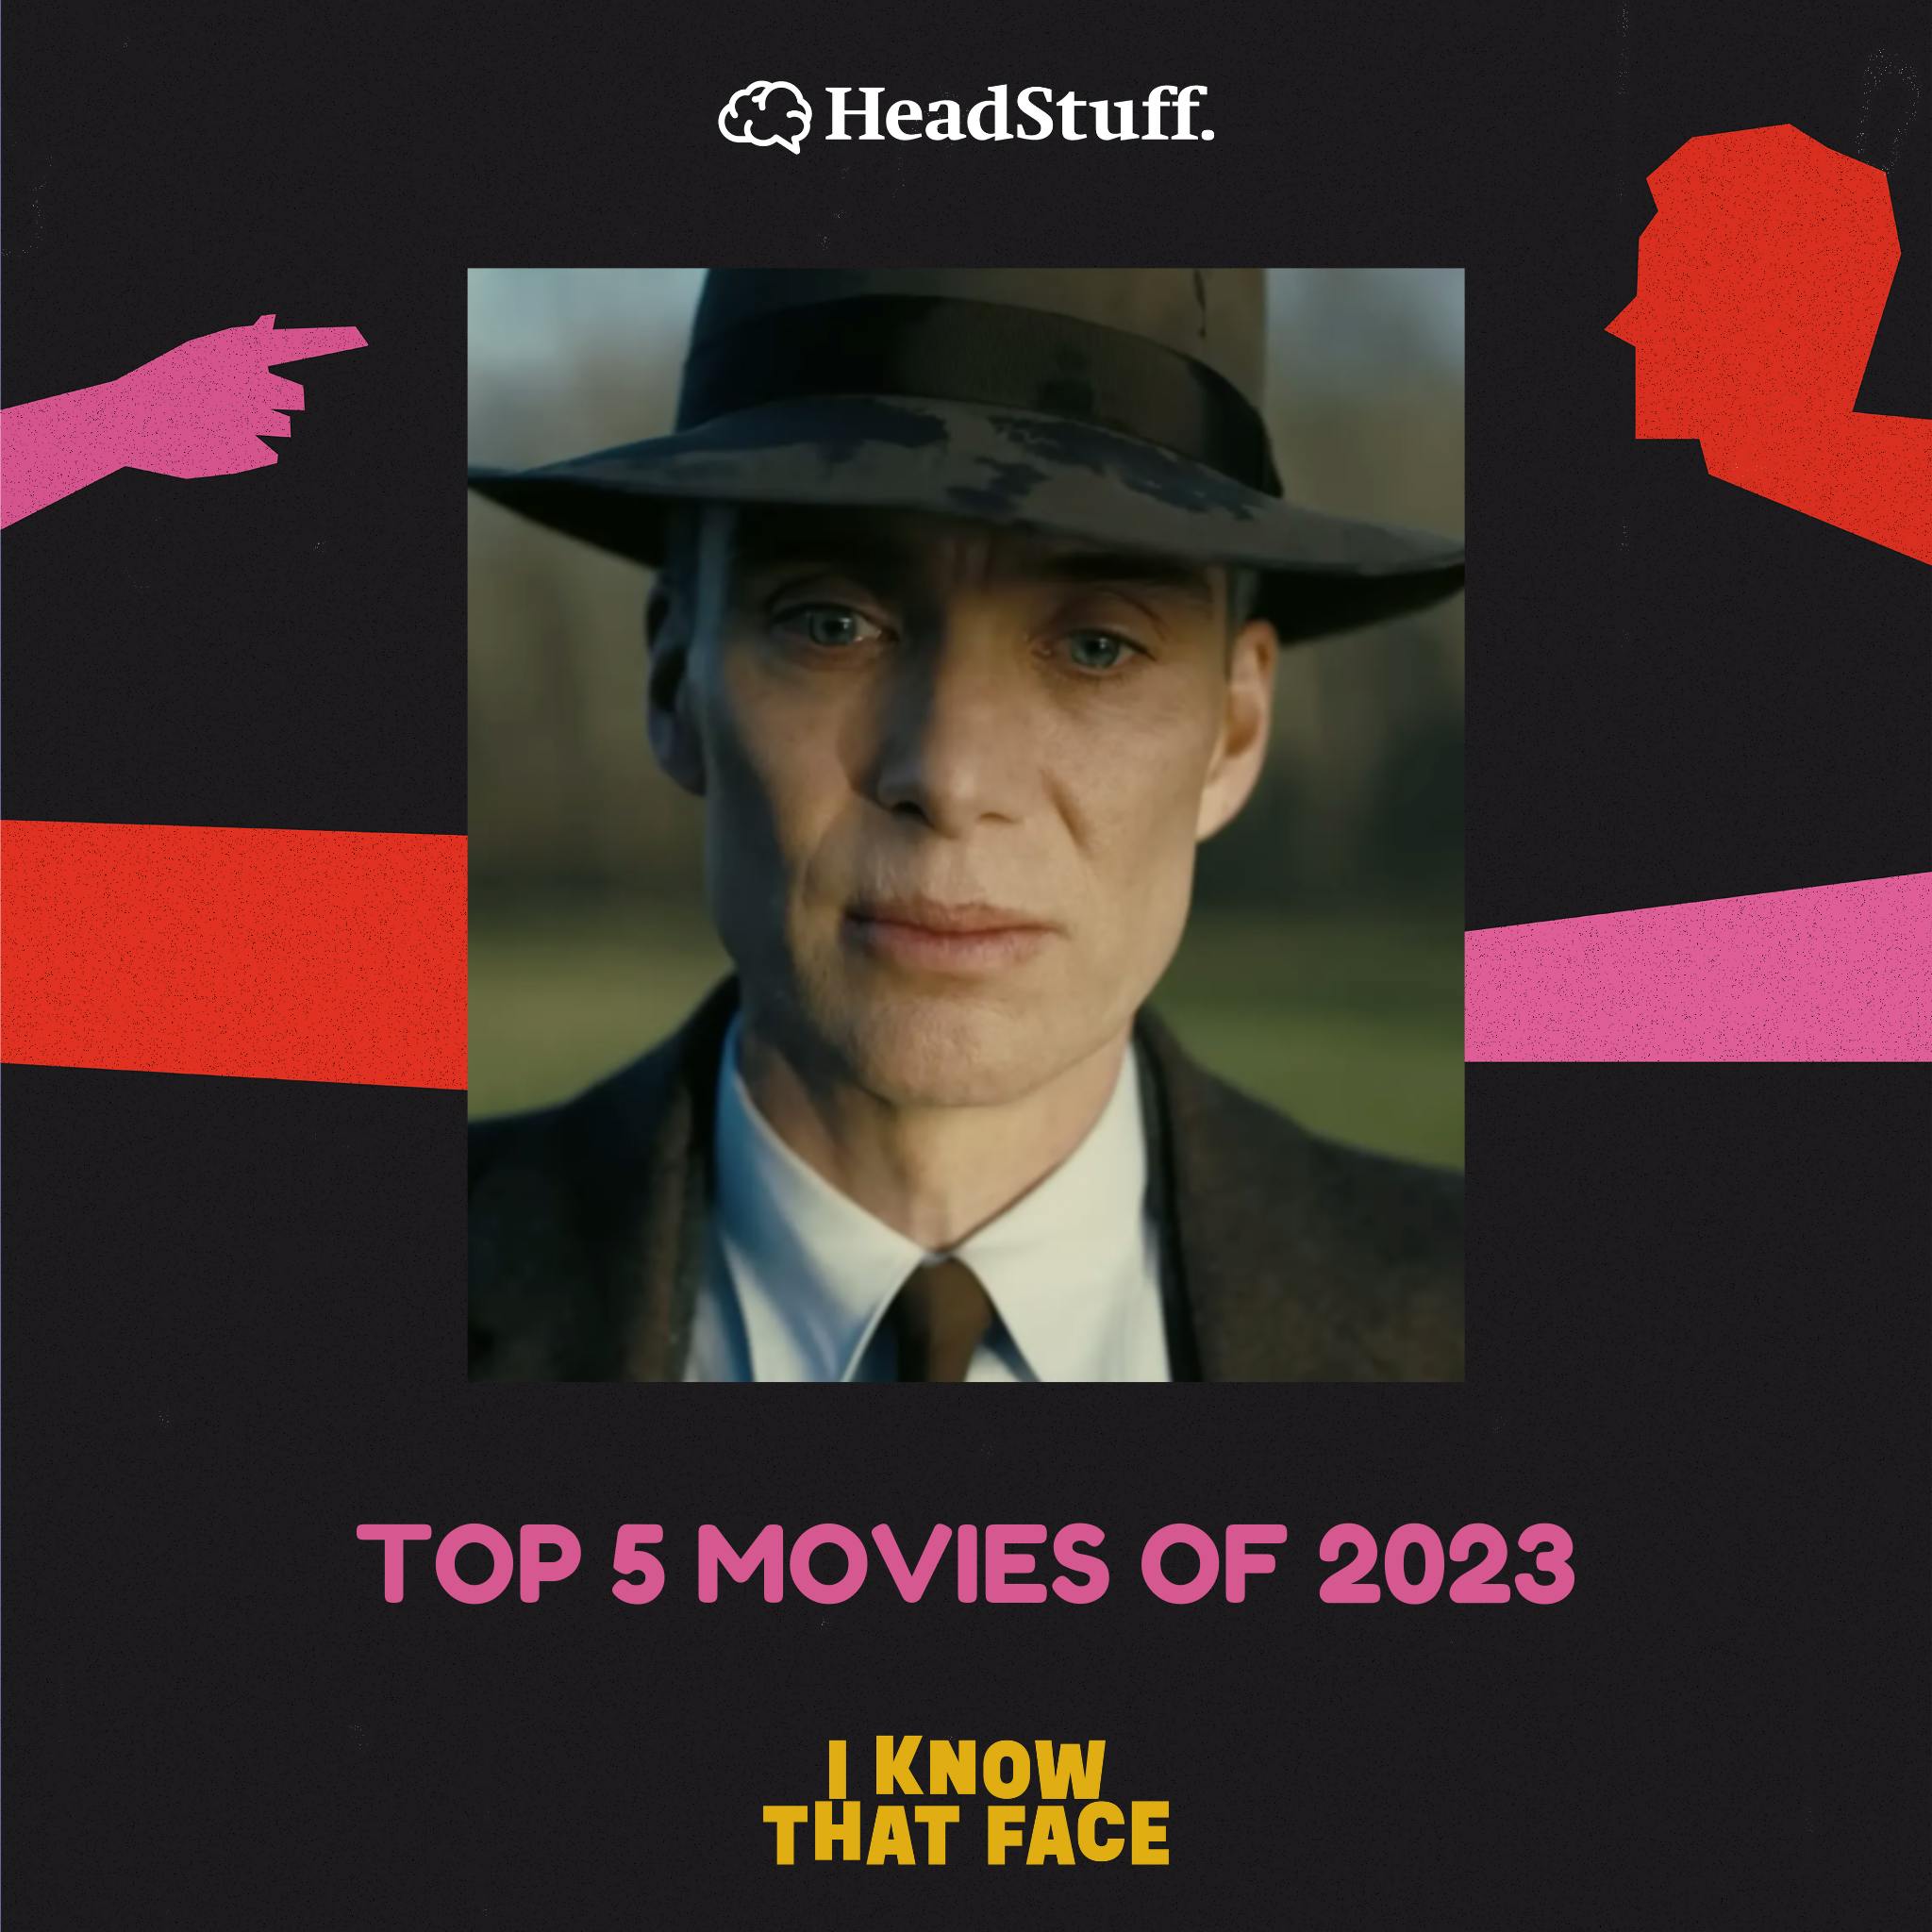 TOP 5 MOVIES OF 2023